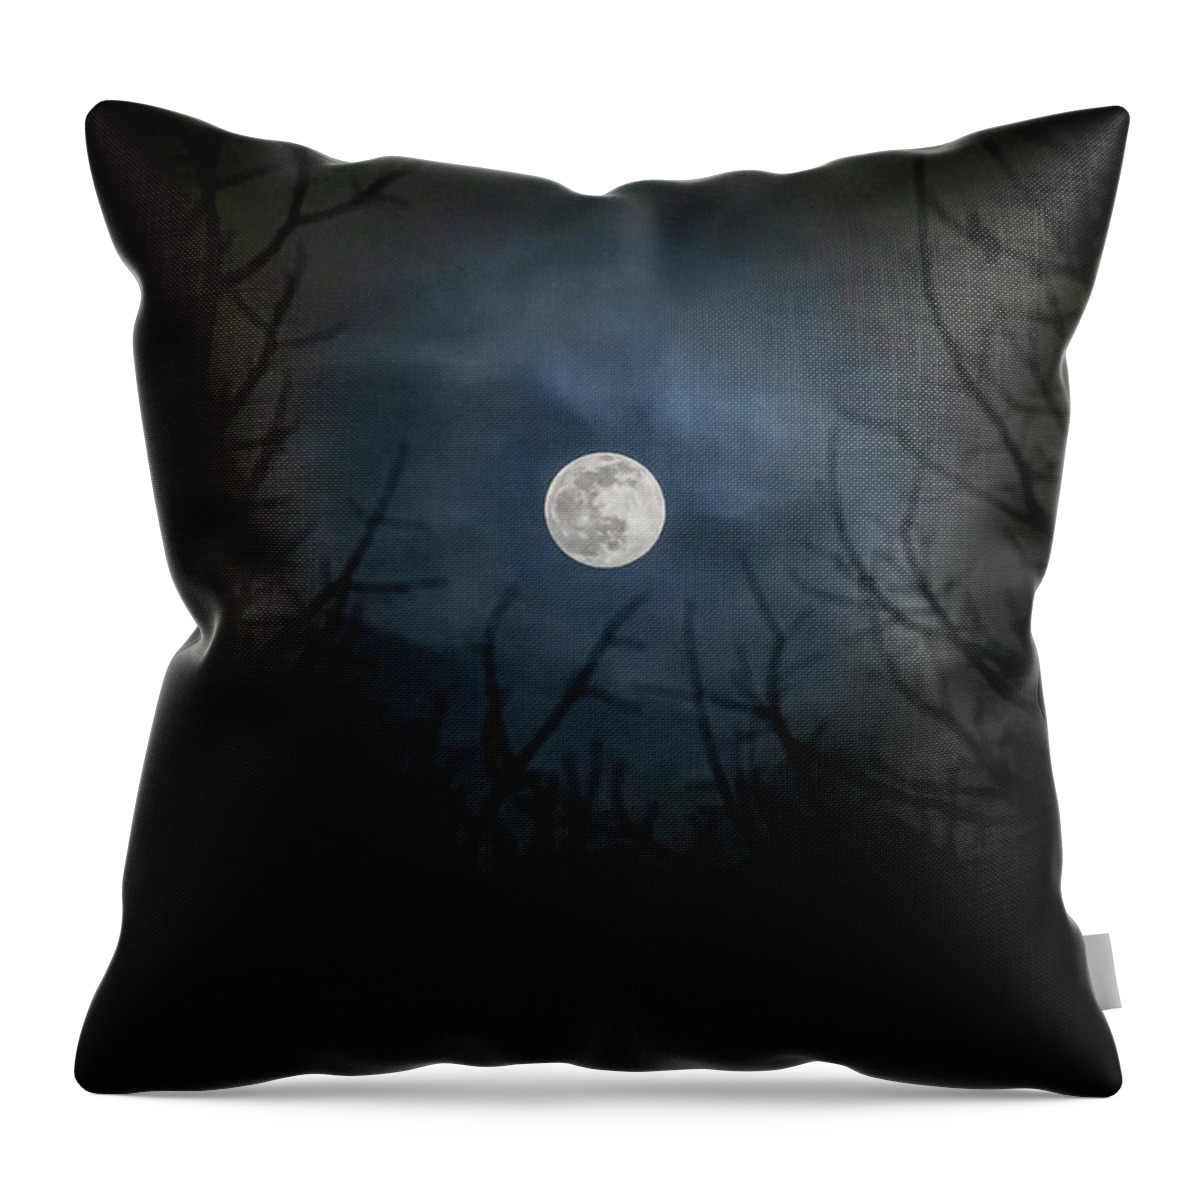 Full Moon Throw Pillow featuring the photograph Full Moon by Flowstate Photography